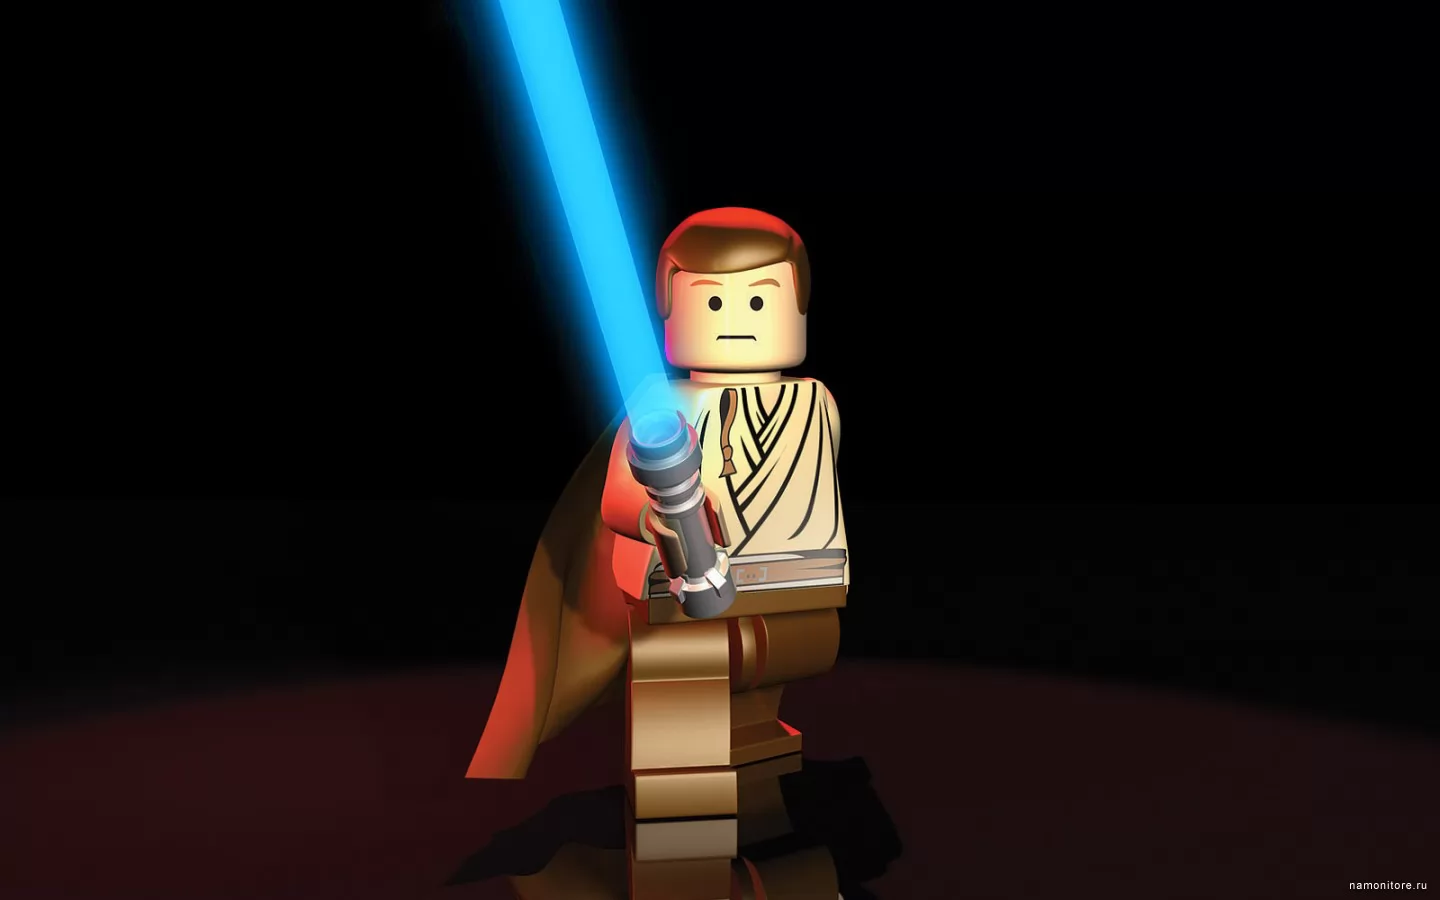 LEGO Star Wars: The Video Game, Star Wars,  ,  